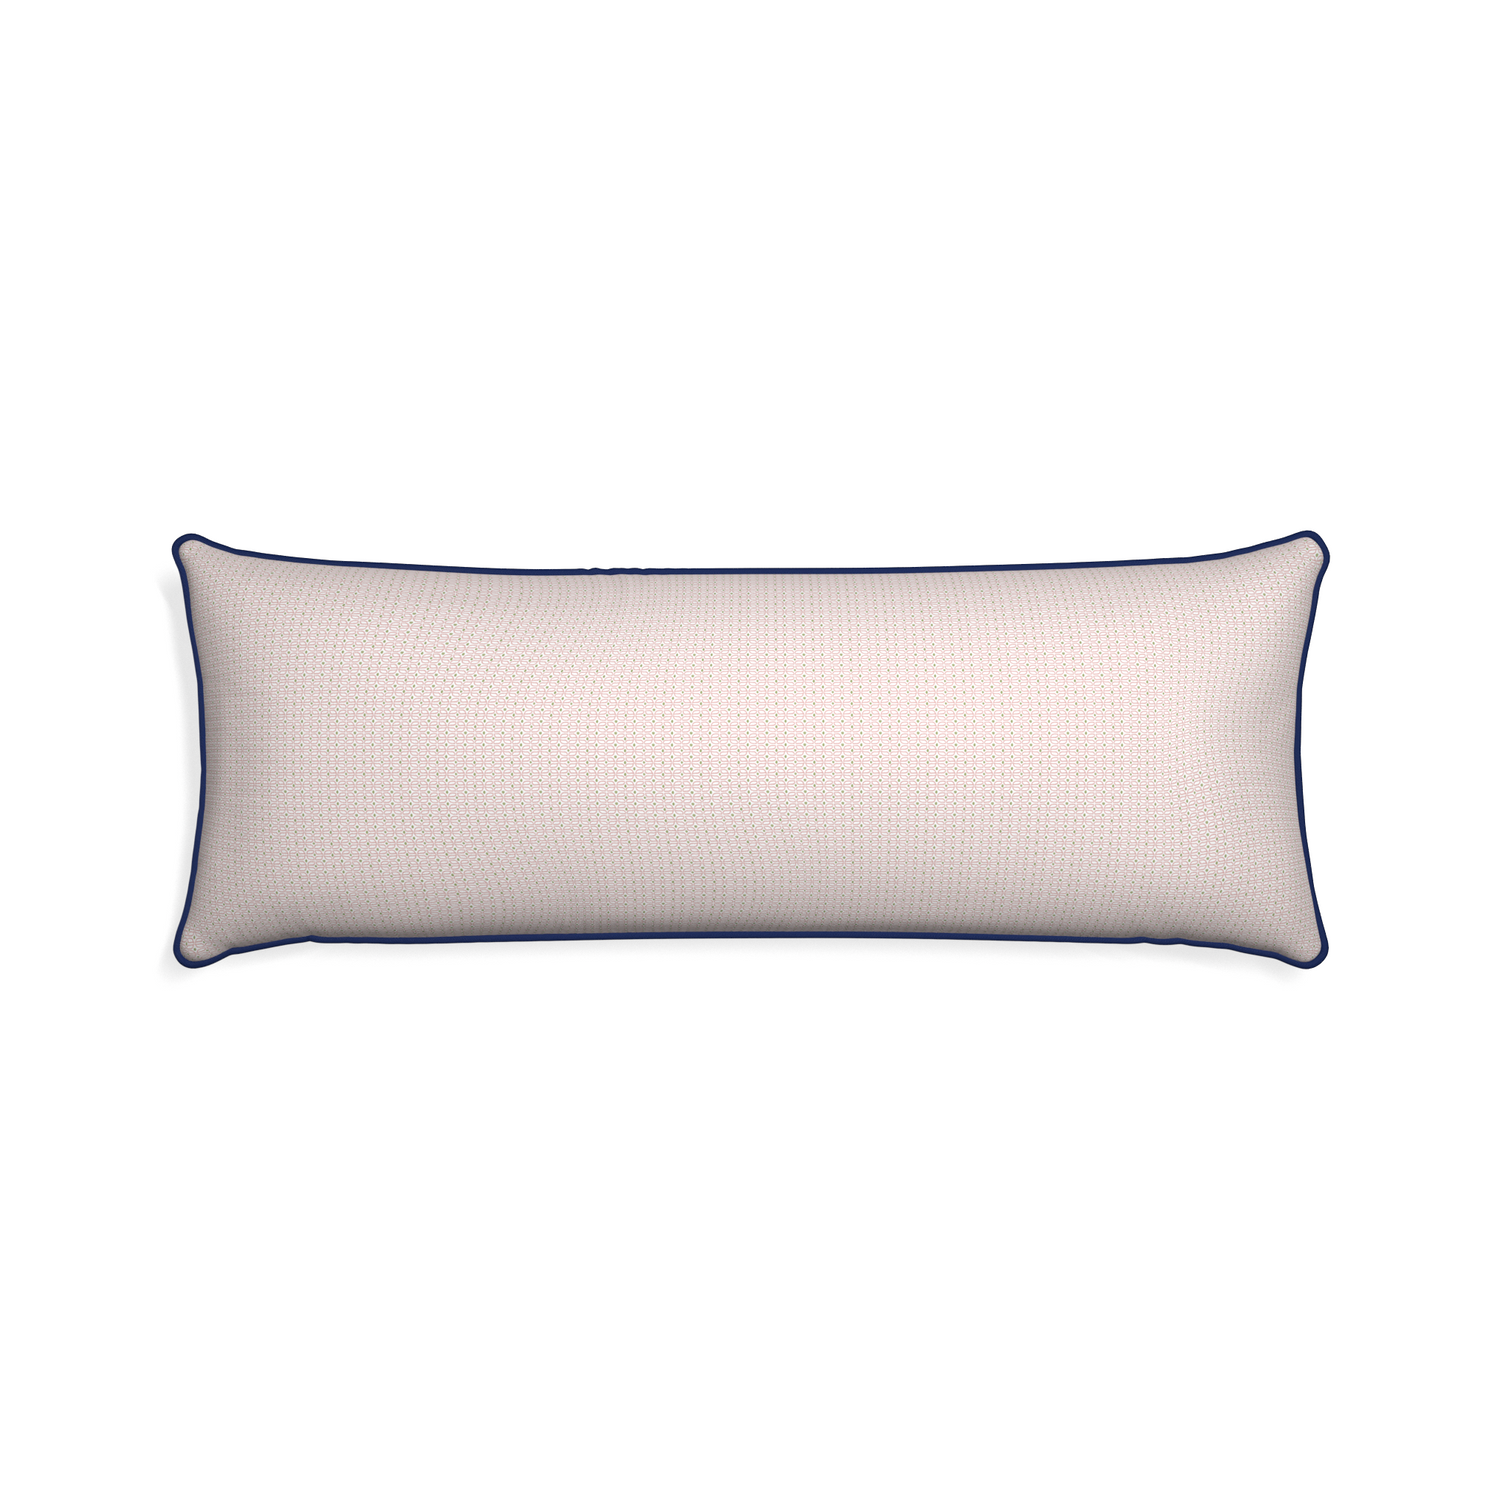 Xl-lumbar loomi pink custom pillow with midnight piping on white background